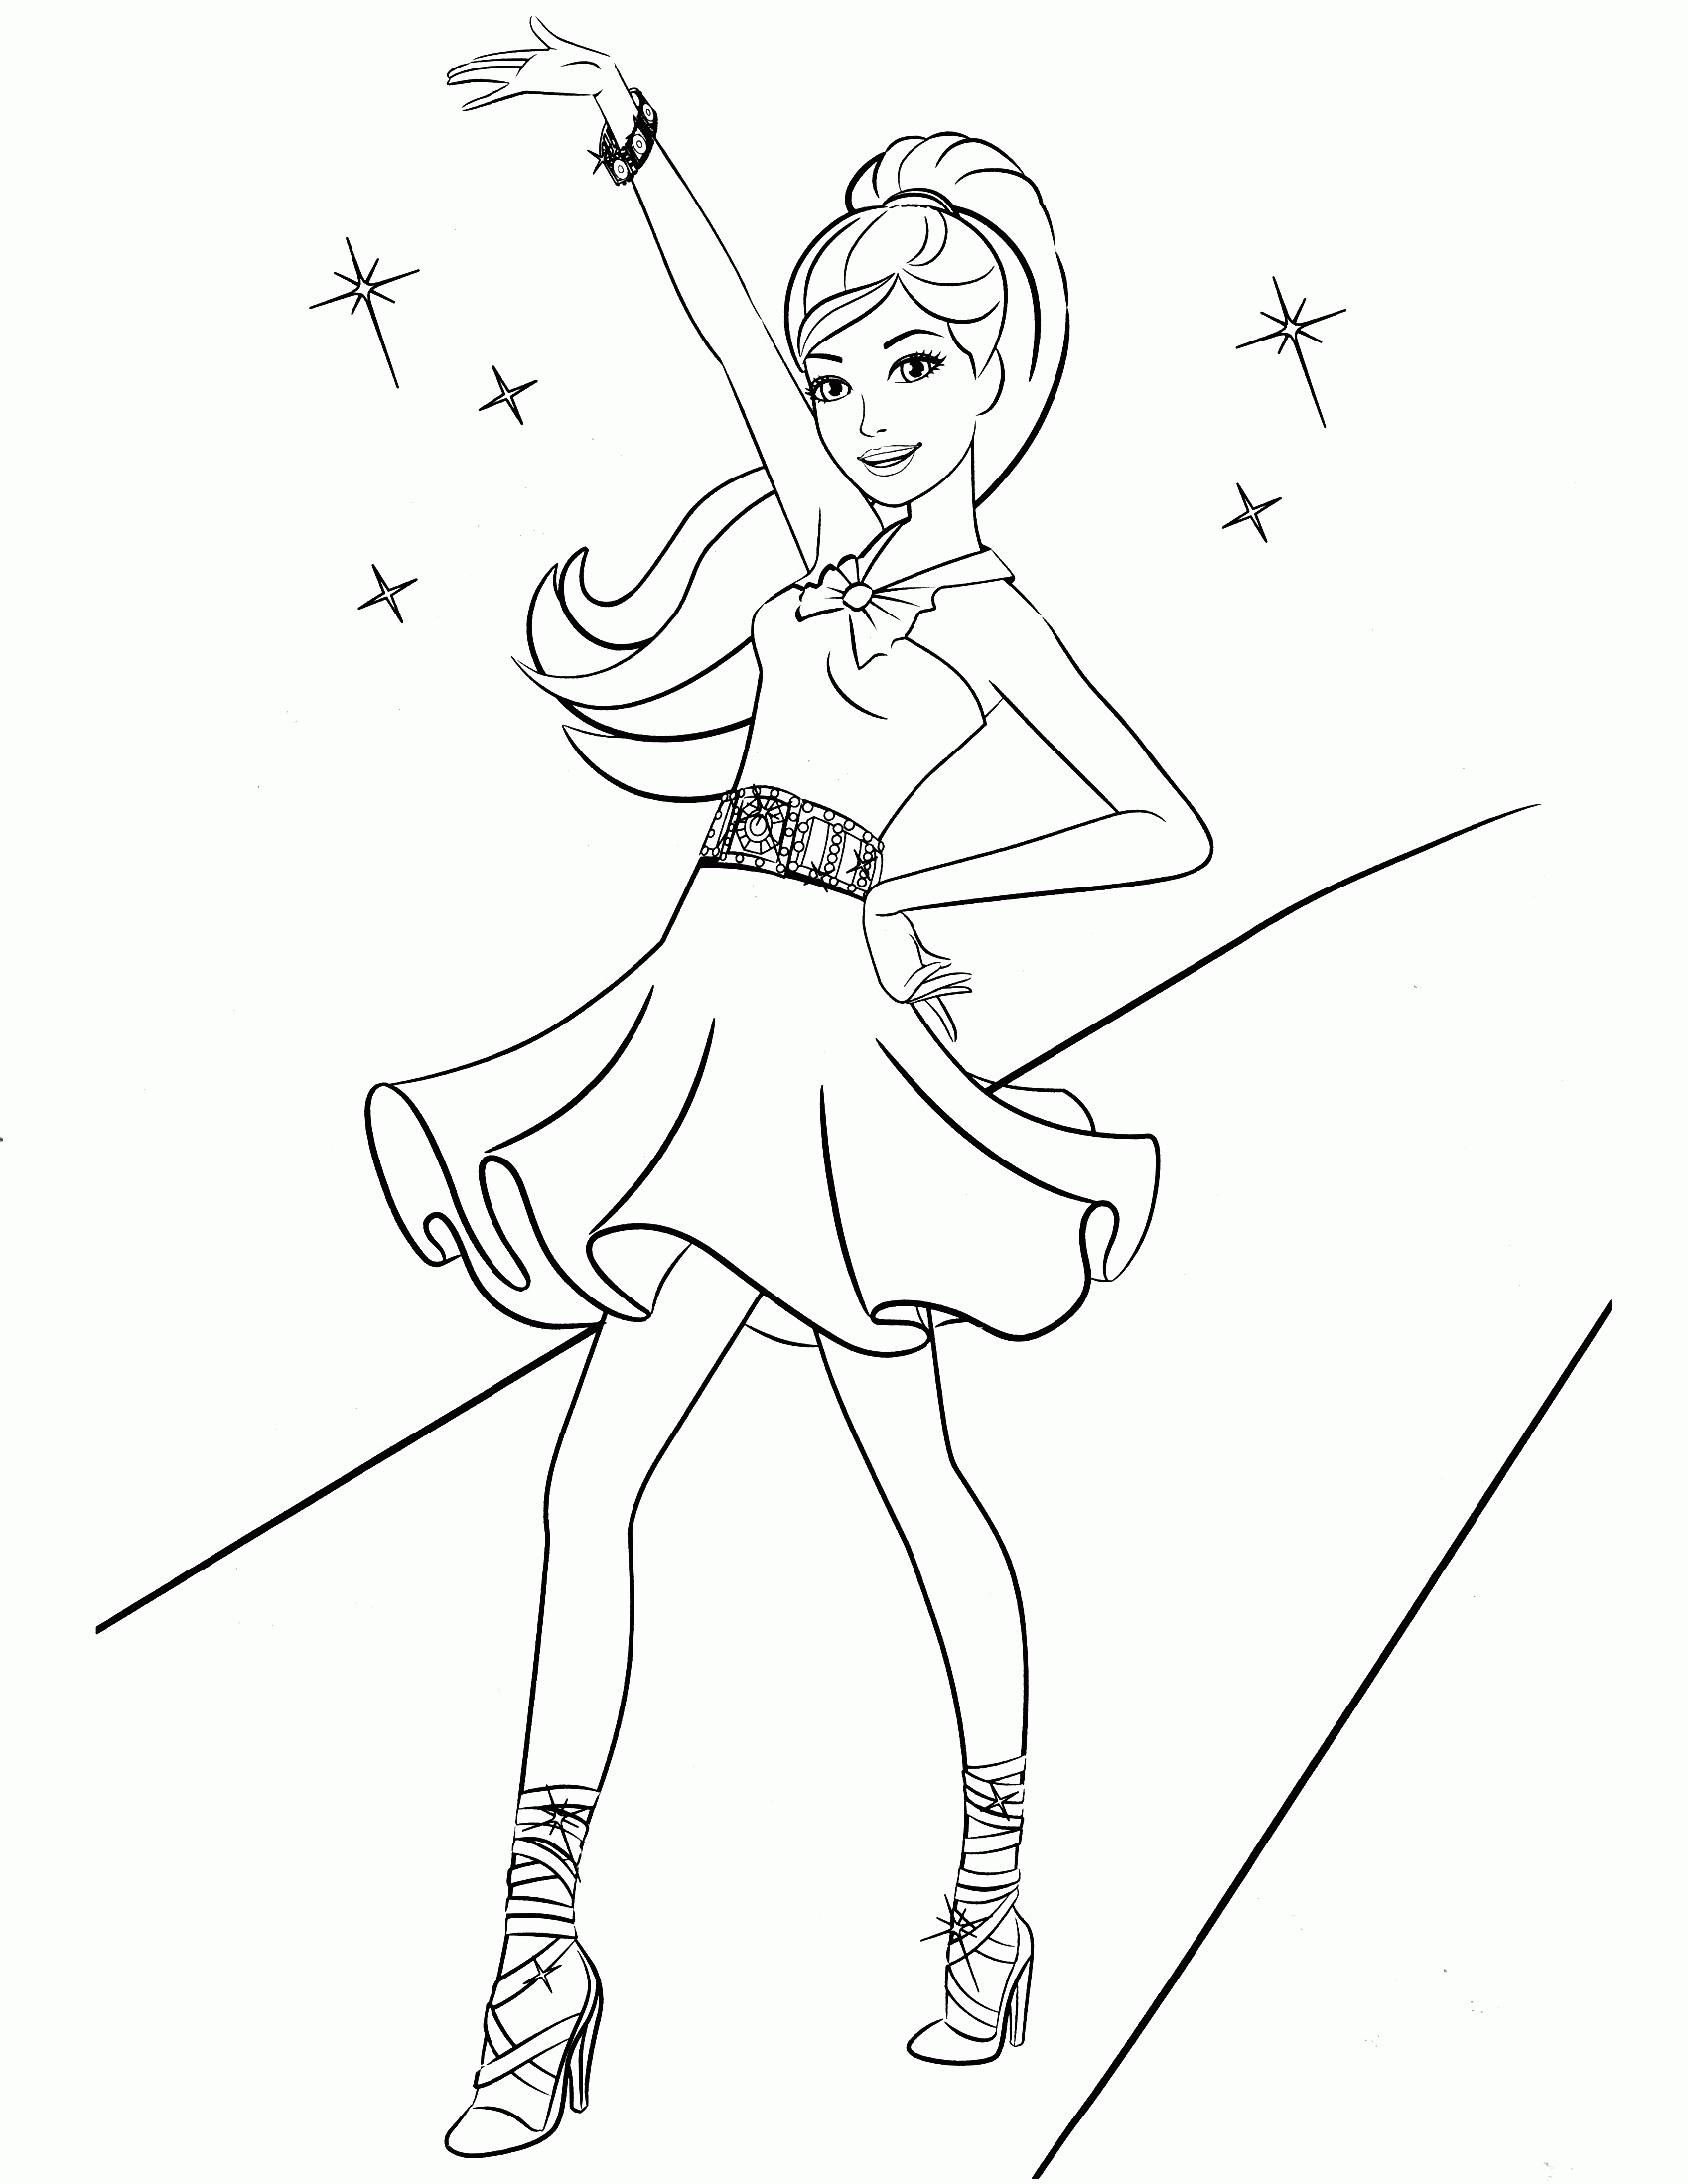 barbie-coloring-pages-for-girls-to-print-4.jpg